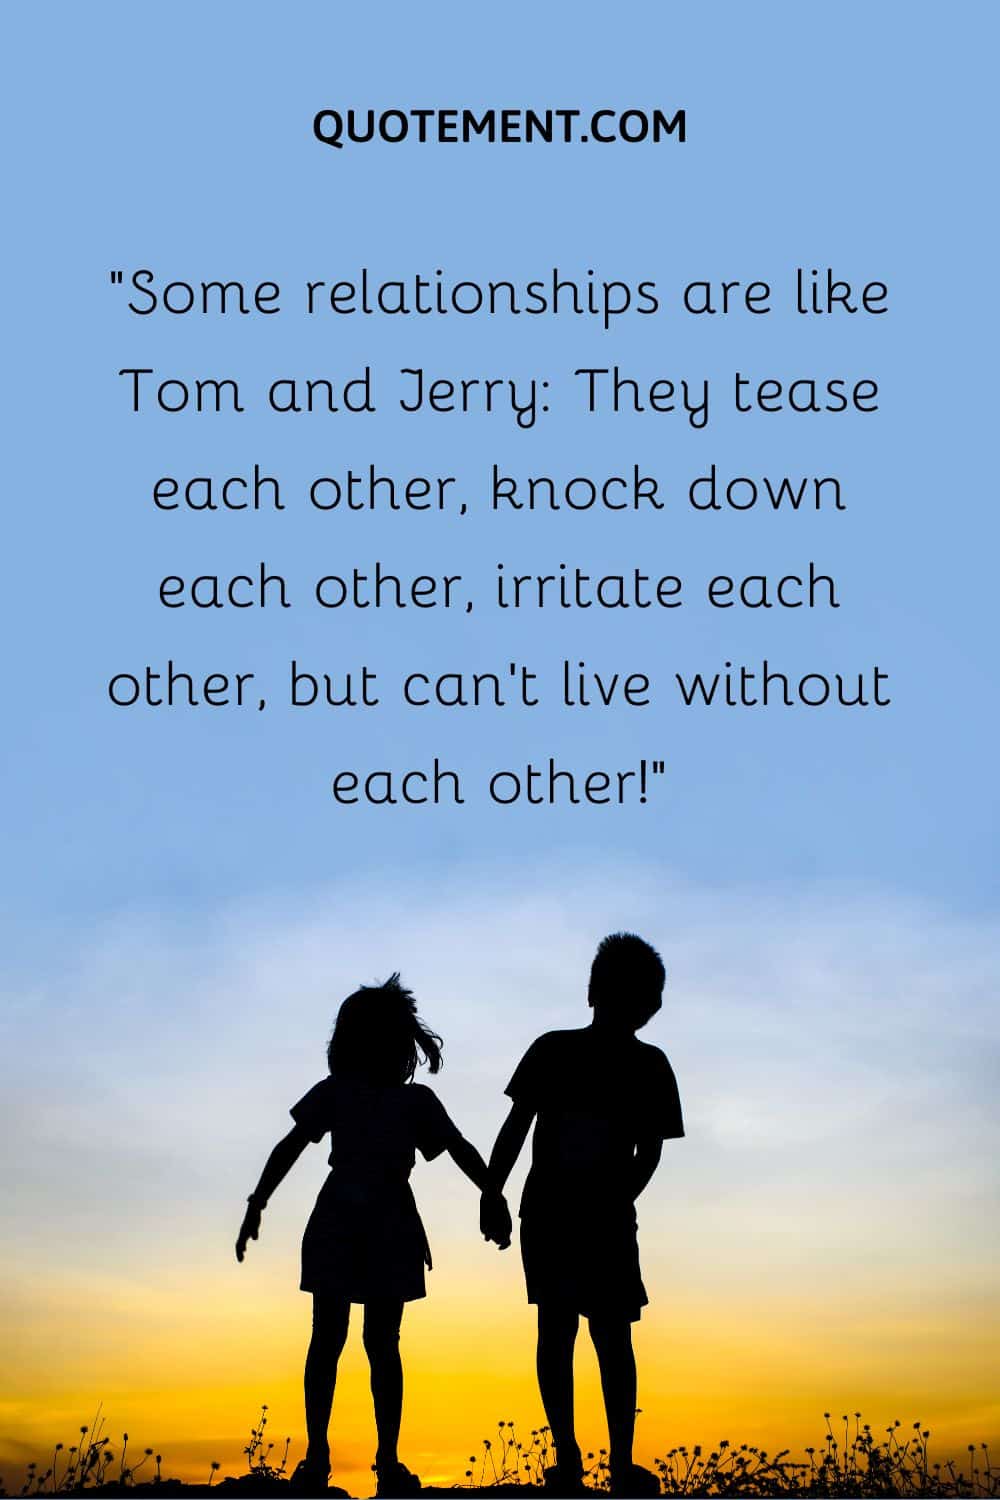 “Some relationships are like Tom and Jerry They tease each other, knock down each other, irritate each other, but can’t live without each other!”